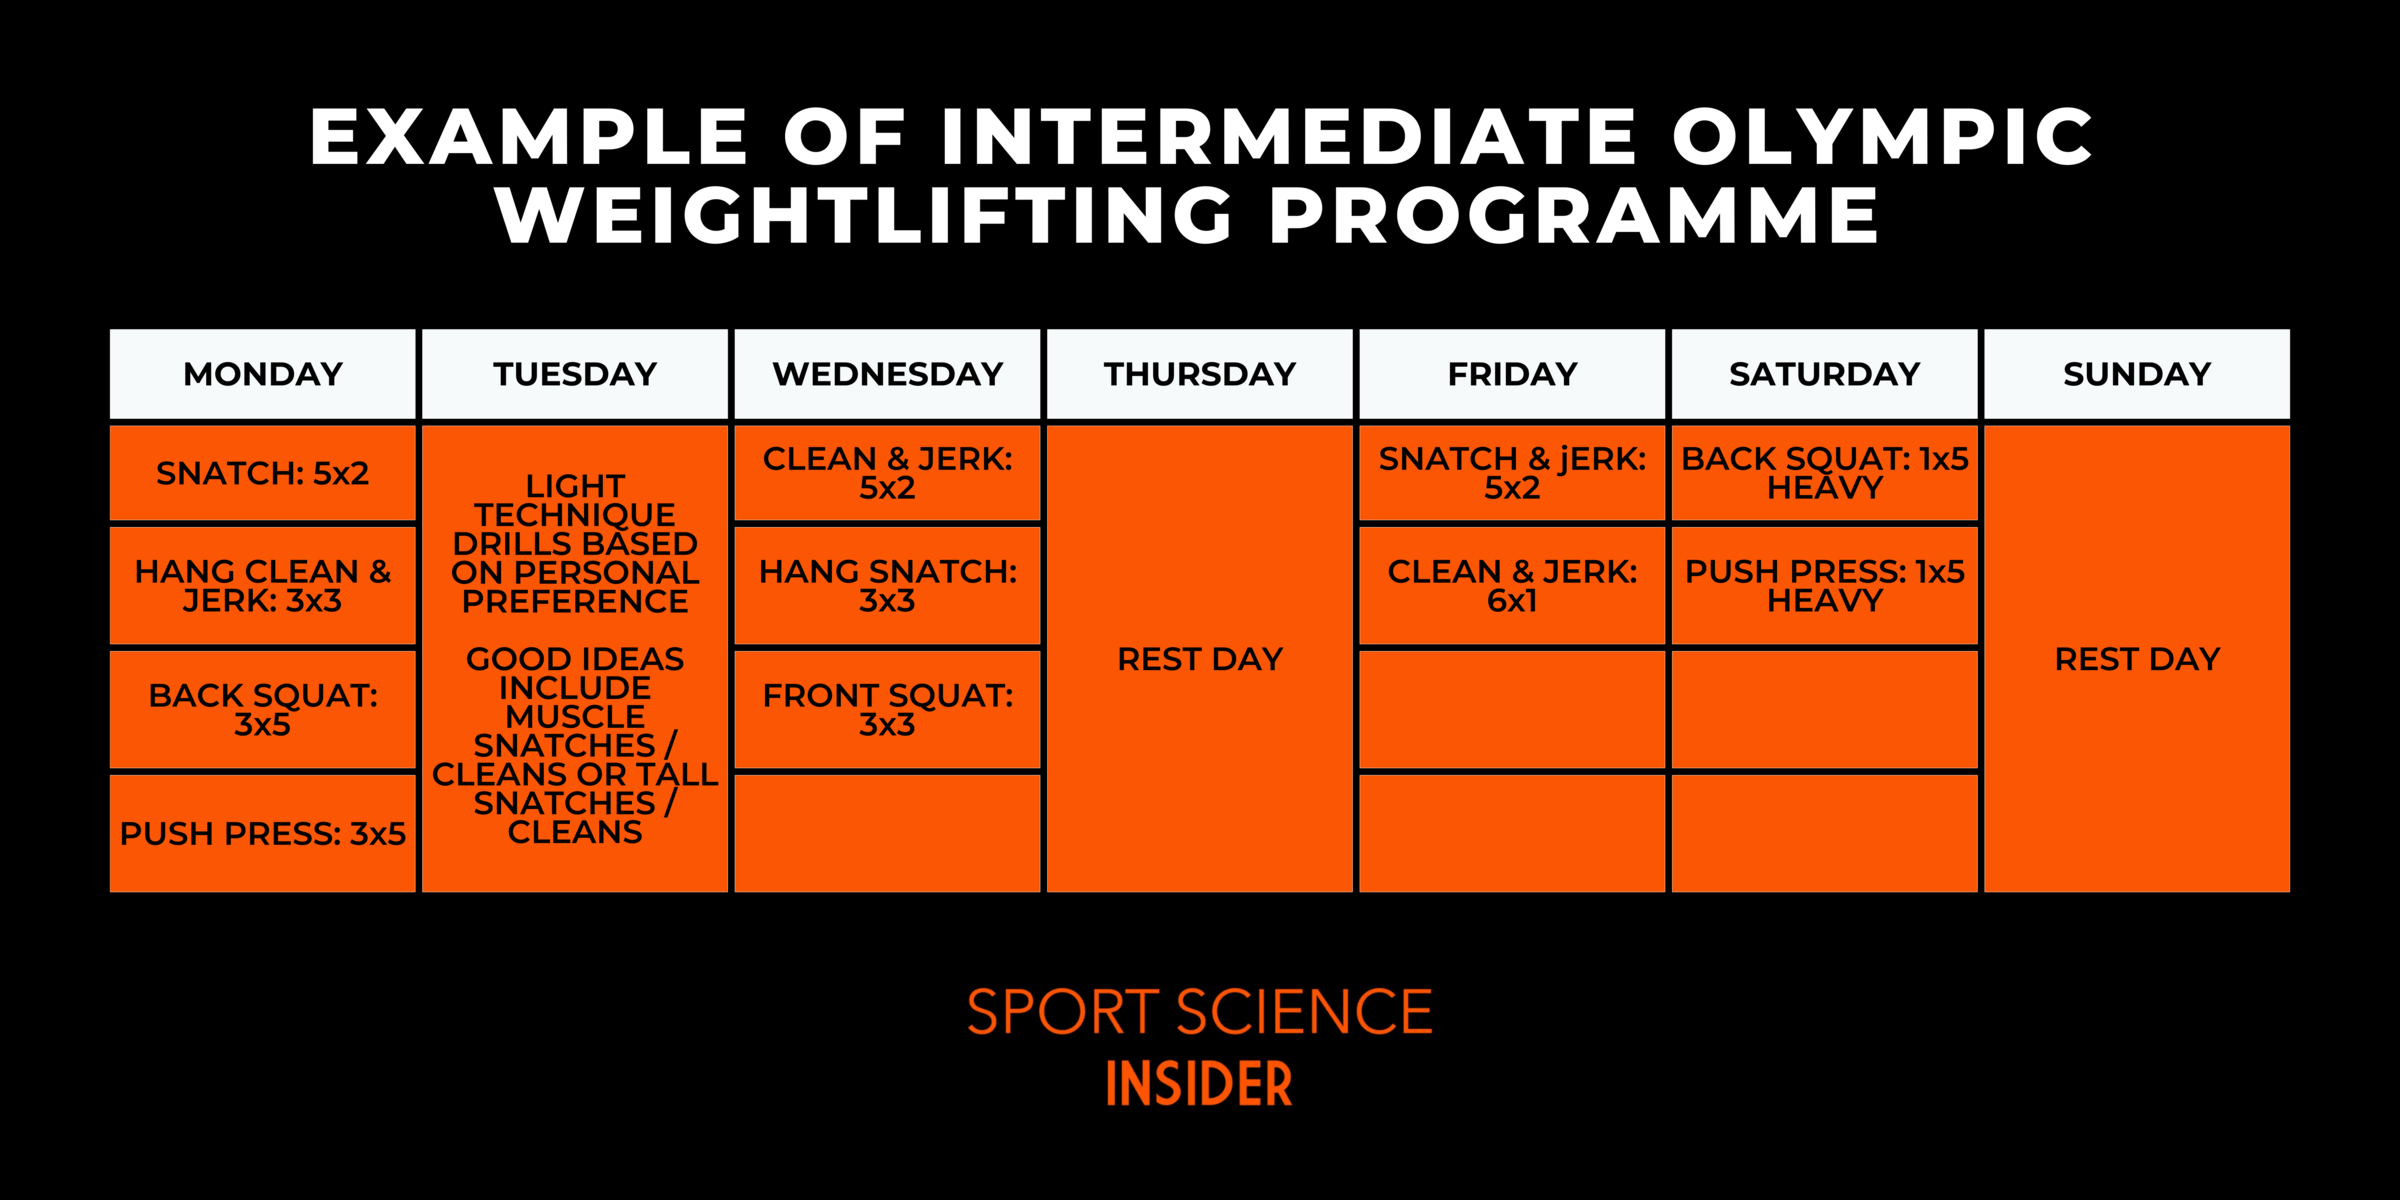 Example of Intermediate Olympic Weightlifting Programme